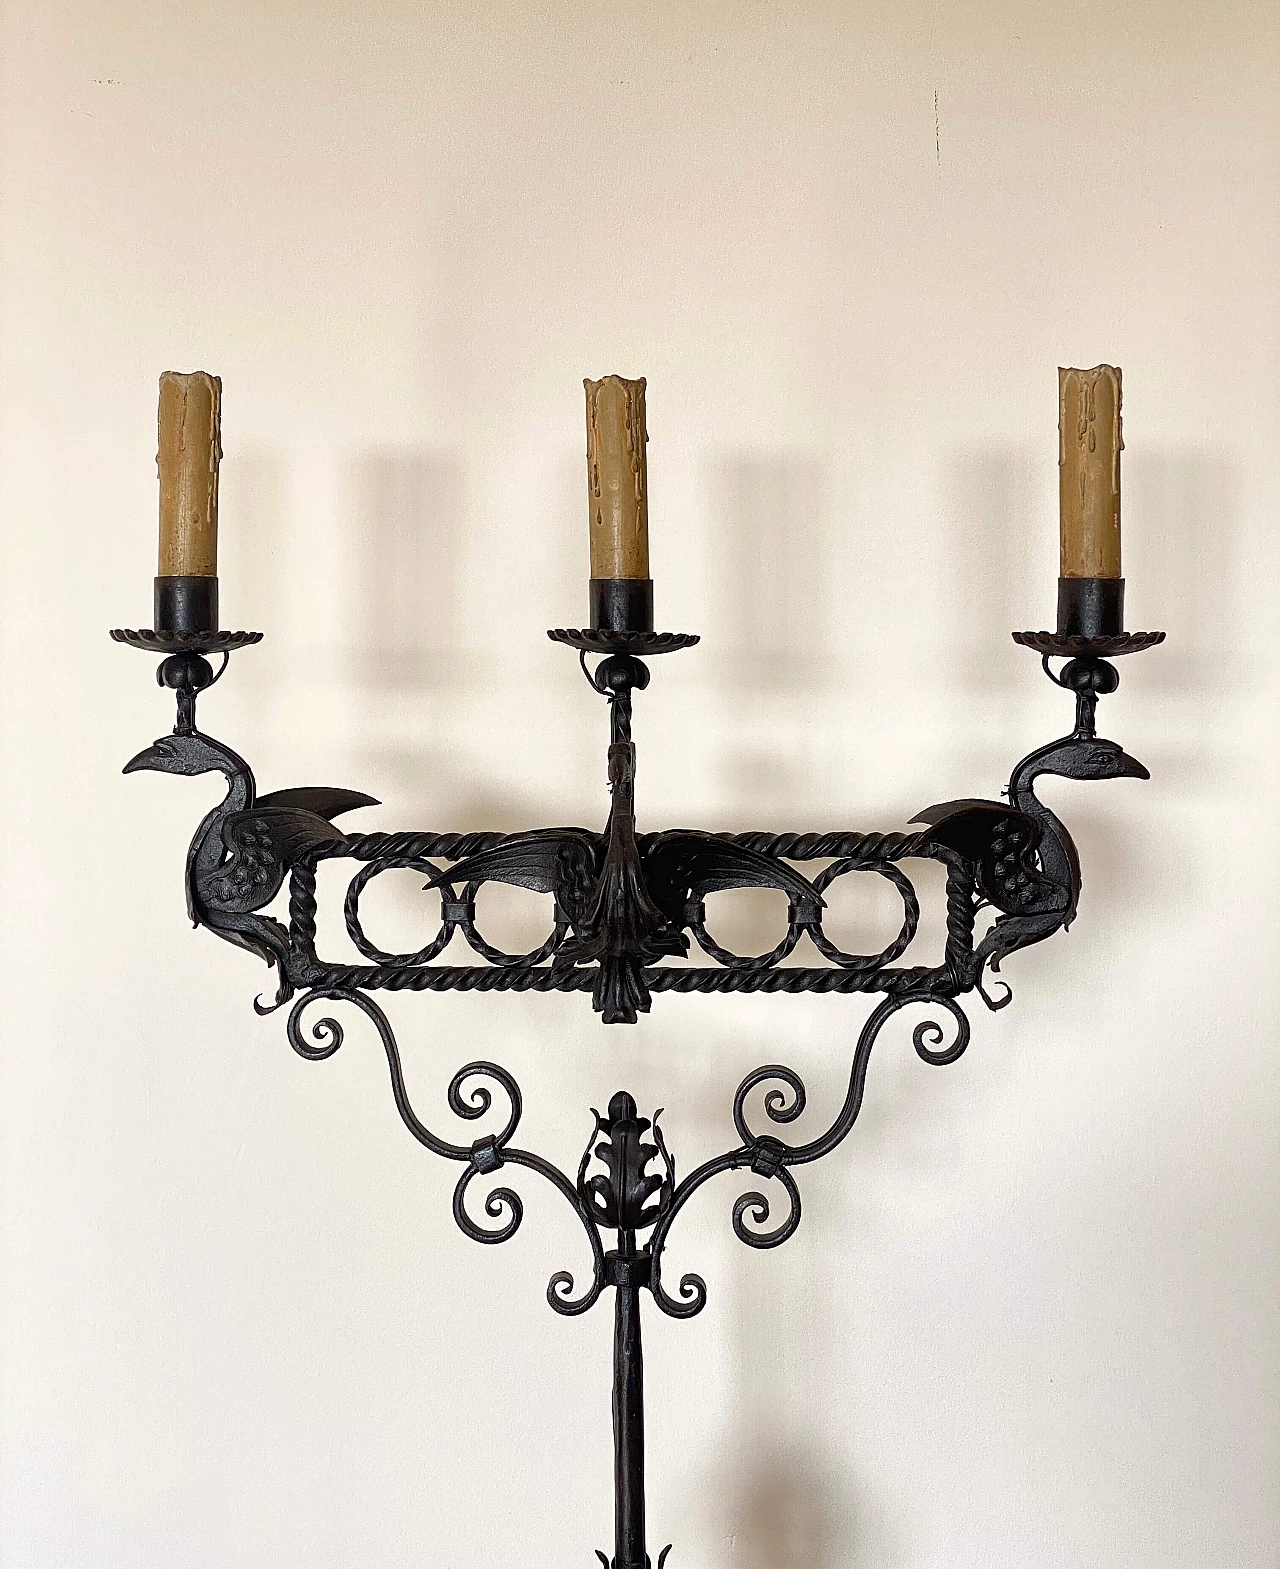 Wrought iron floor candle holder, early 20th century 14